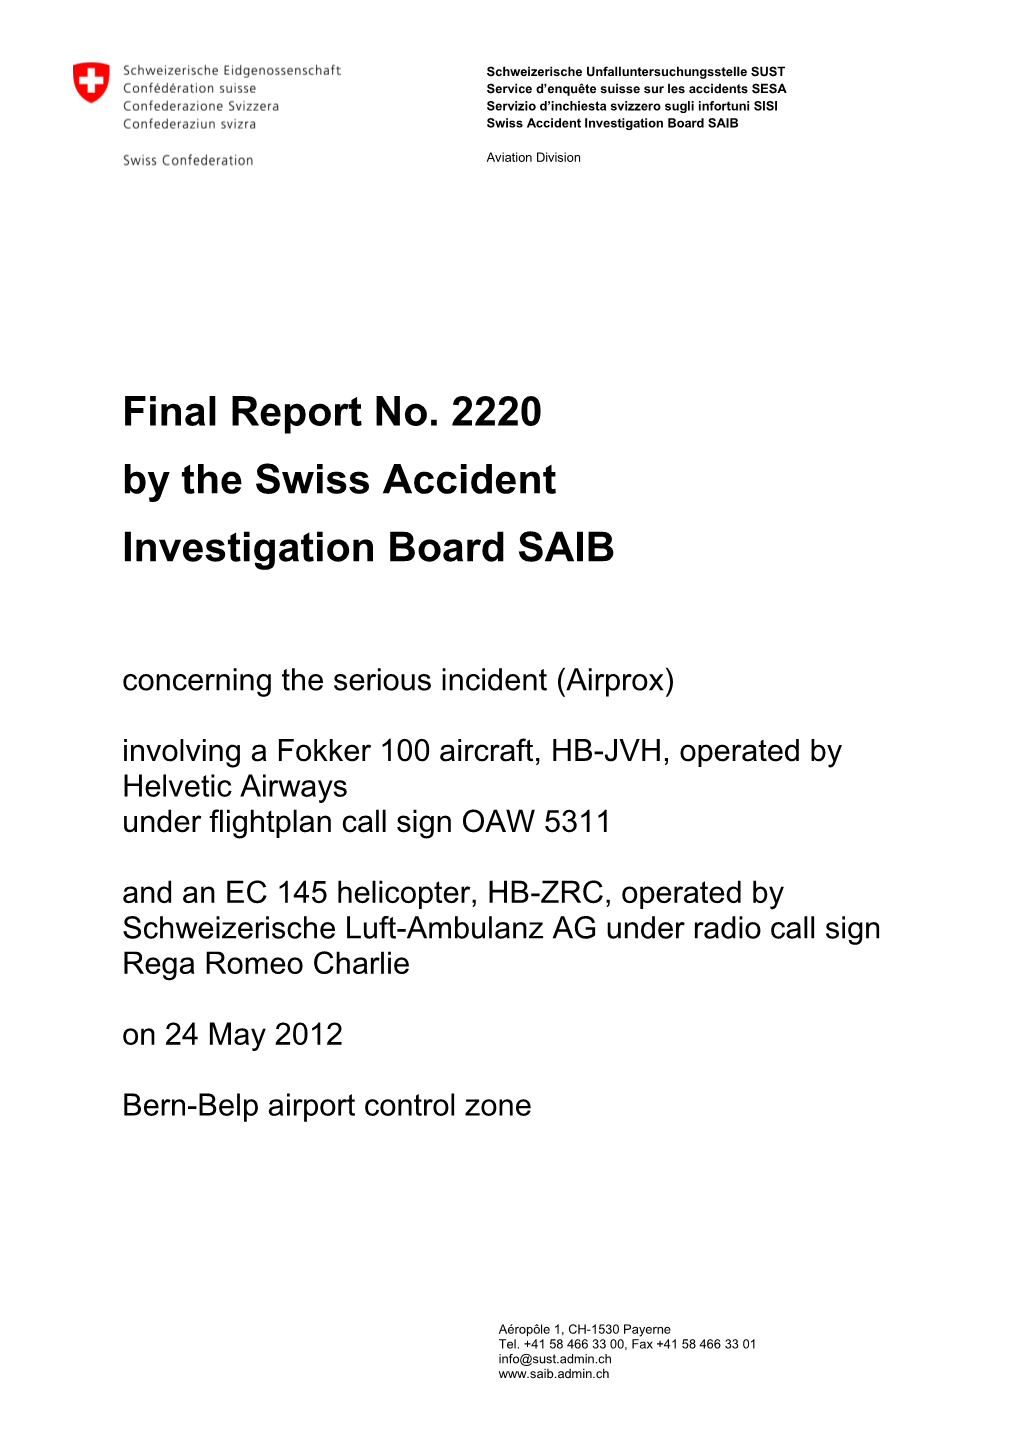 Final Report No. 2220 by the Swiss Accident Investigation Board SAIB